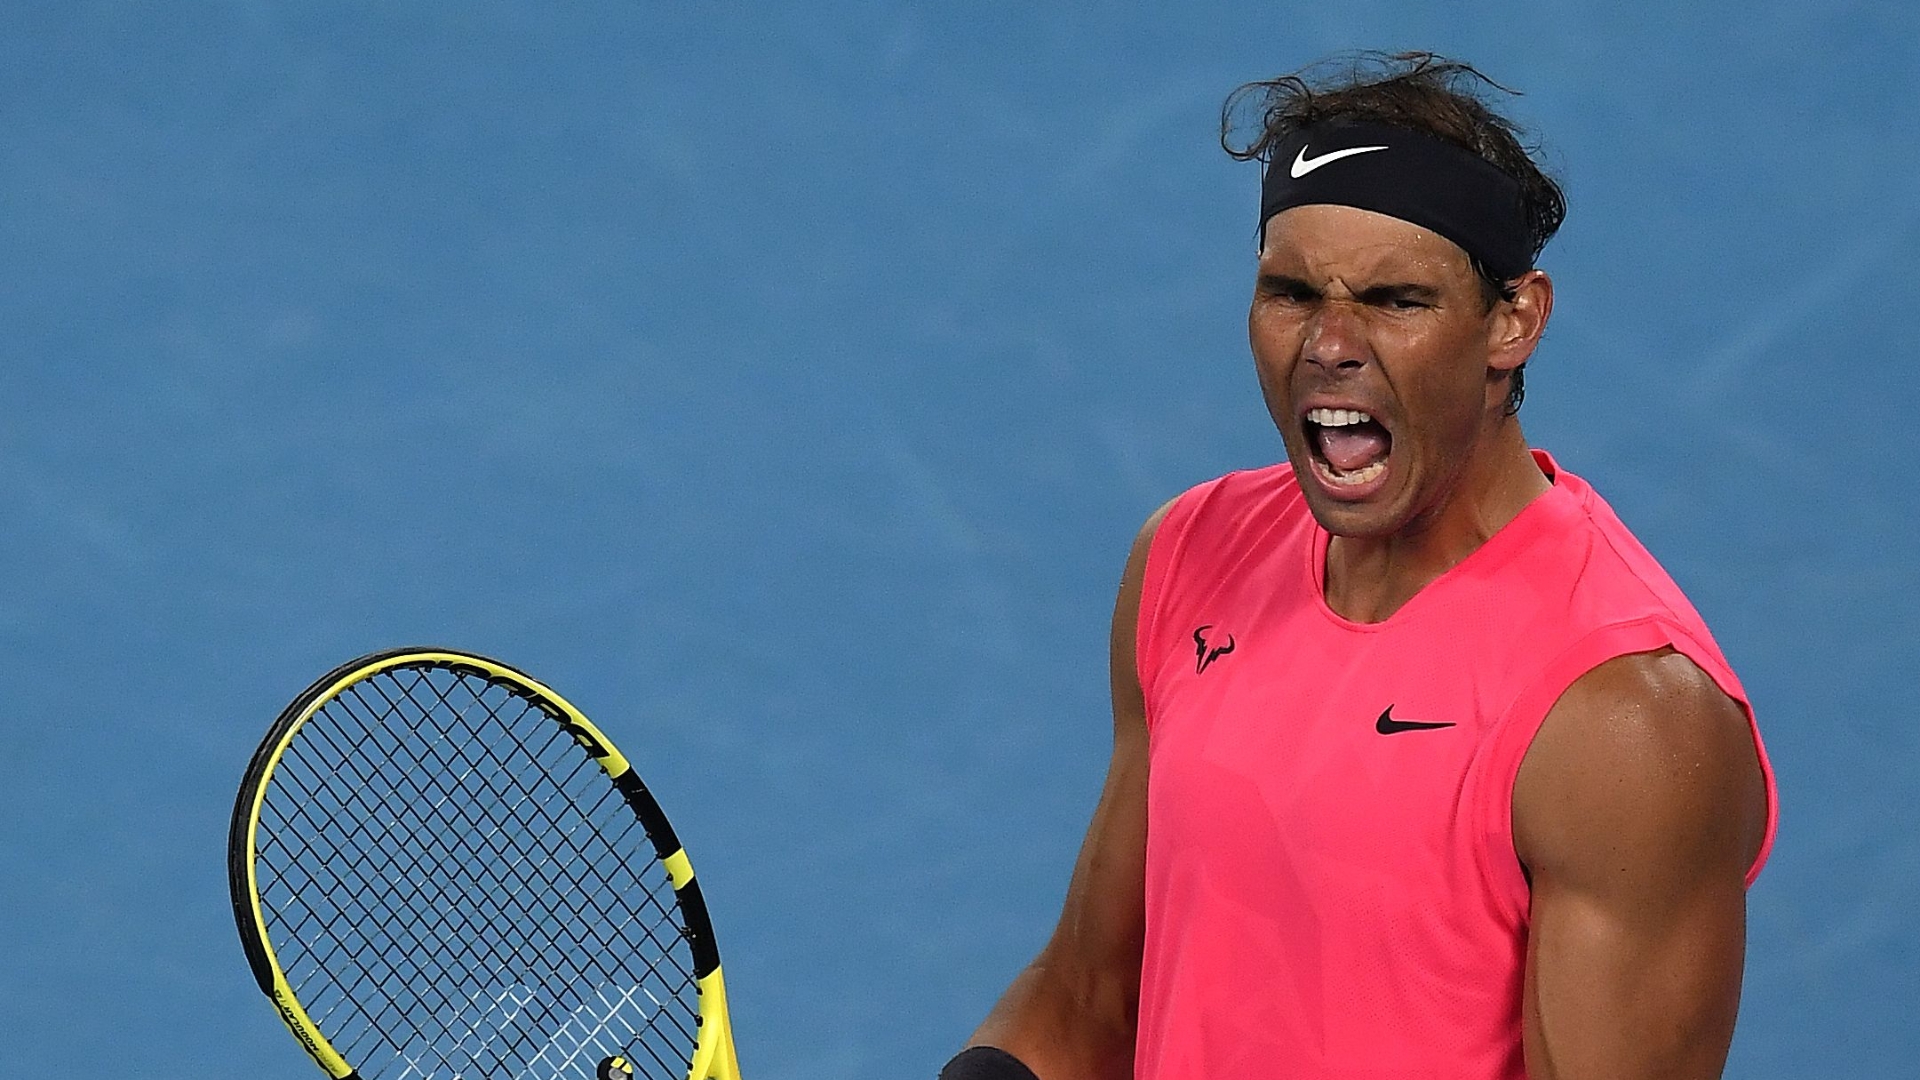 Nadal beats spirited Kyrgios to advance to quarterfinals - Stream the Video 